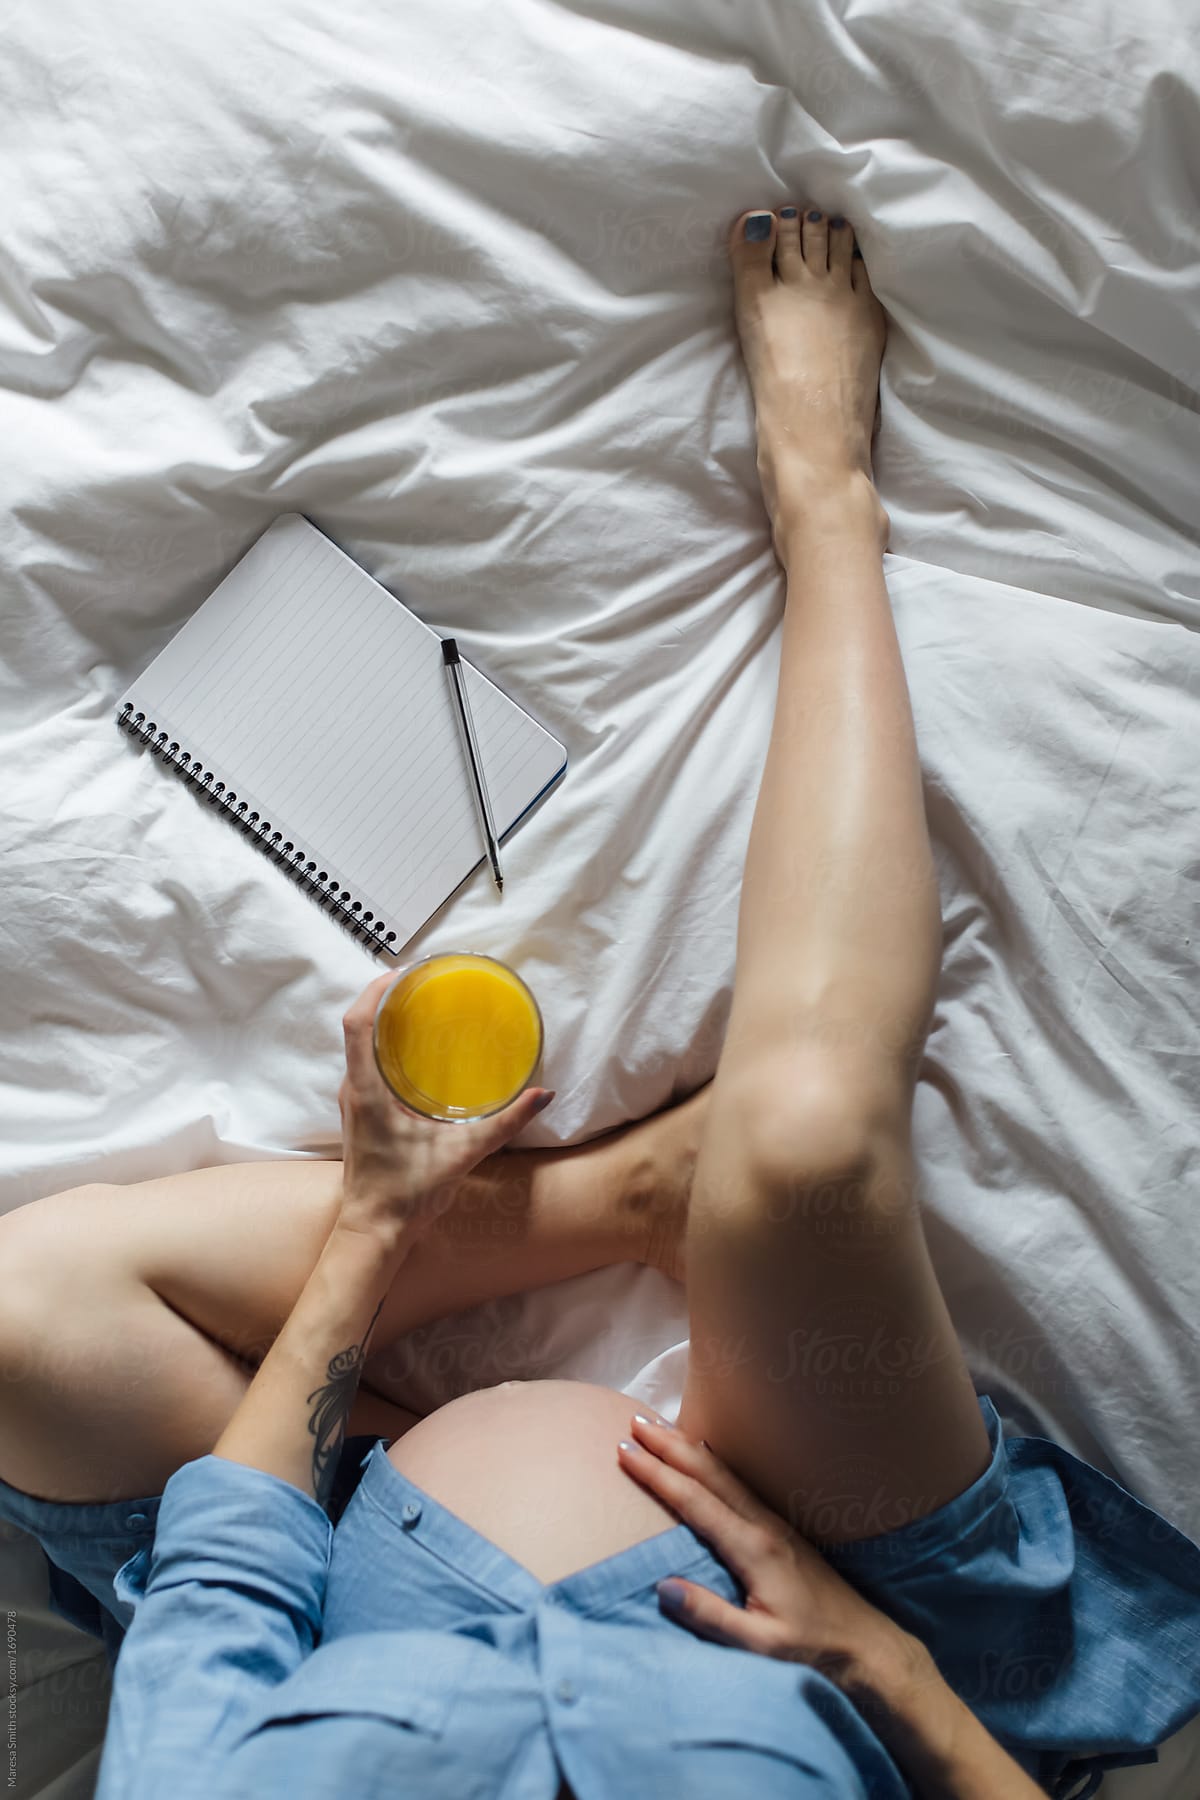 A pregnant women in a blue shirt with bare legs and bump, holding a glass of orange juice with a blank notebook on the bed